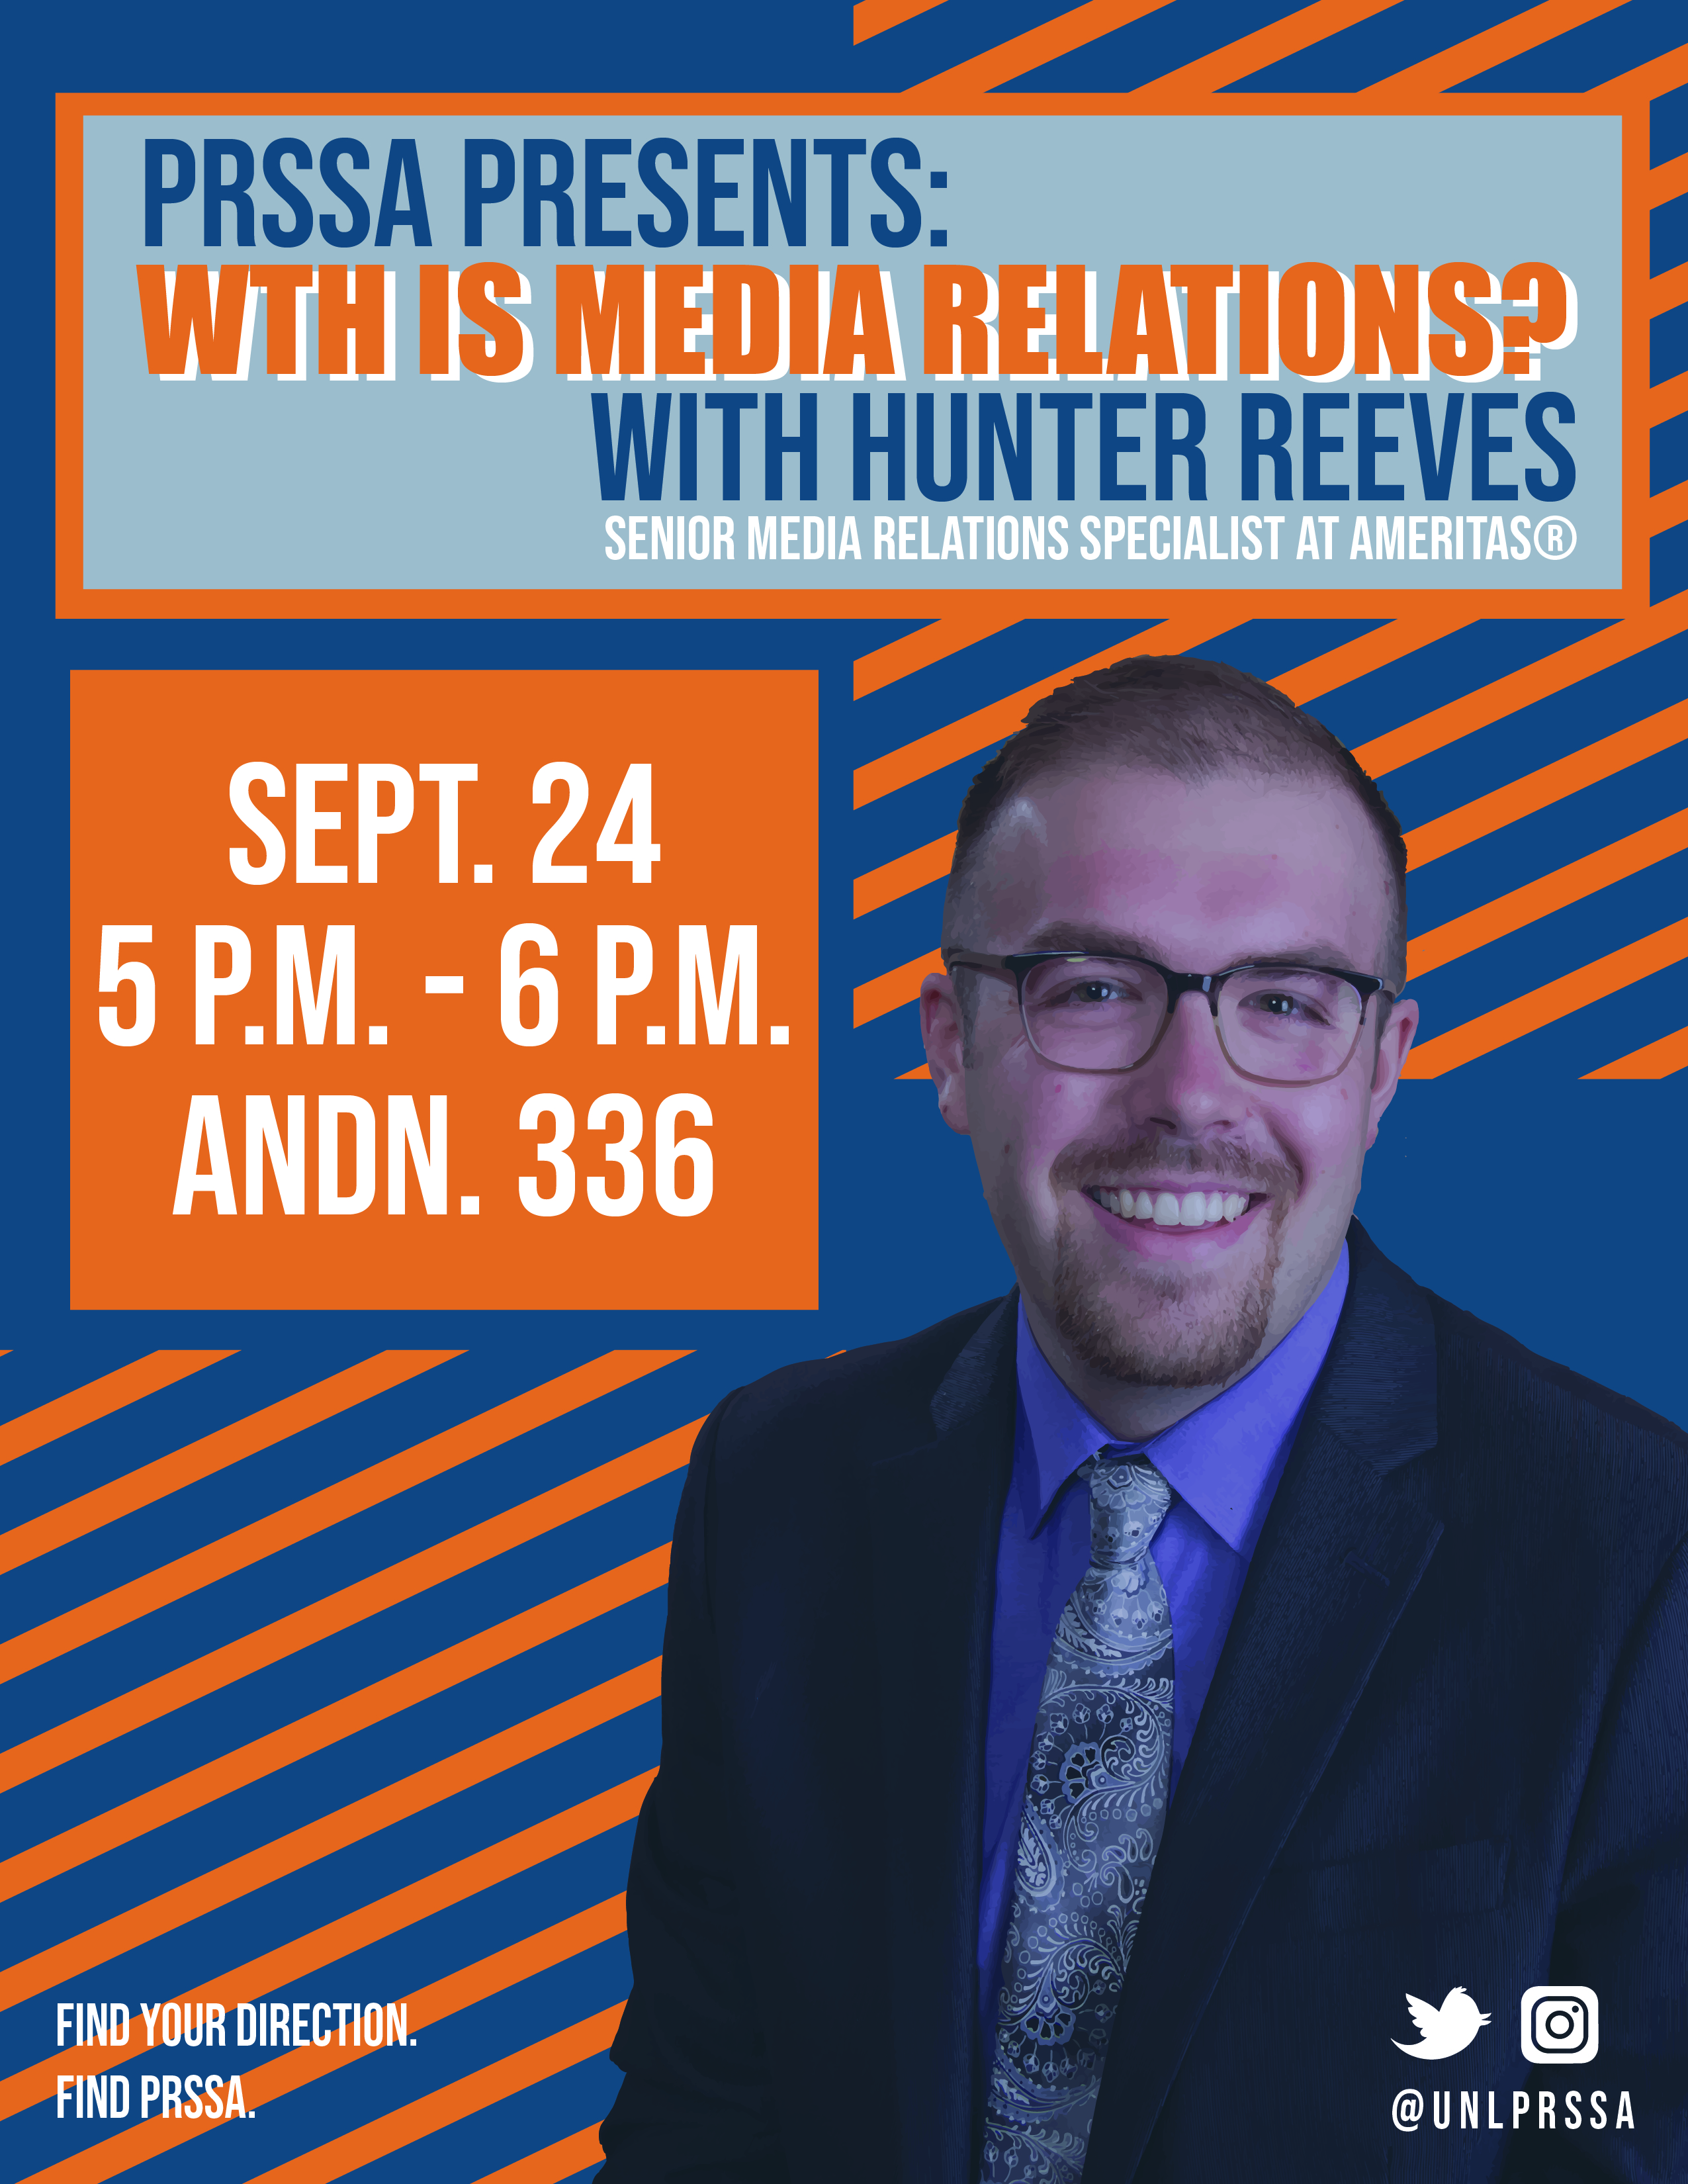 Listen, ask questions and learn just what the heck media relations really is.